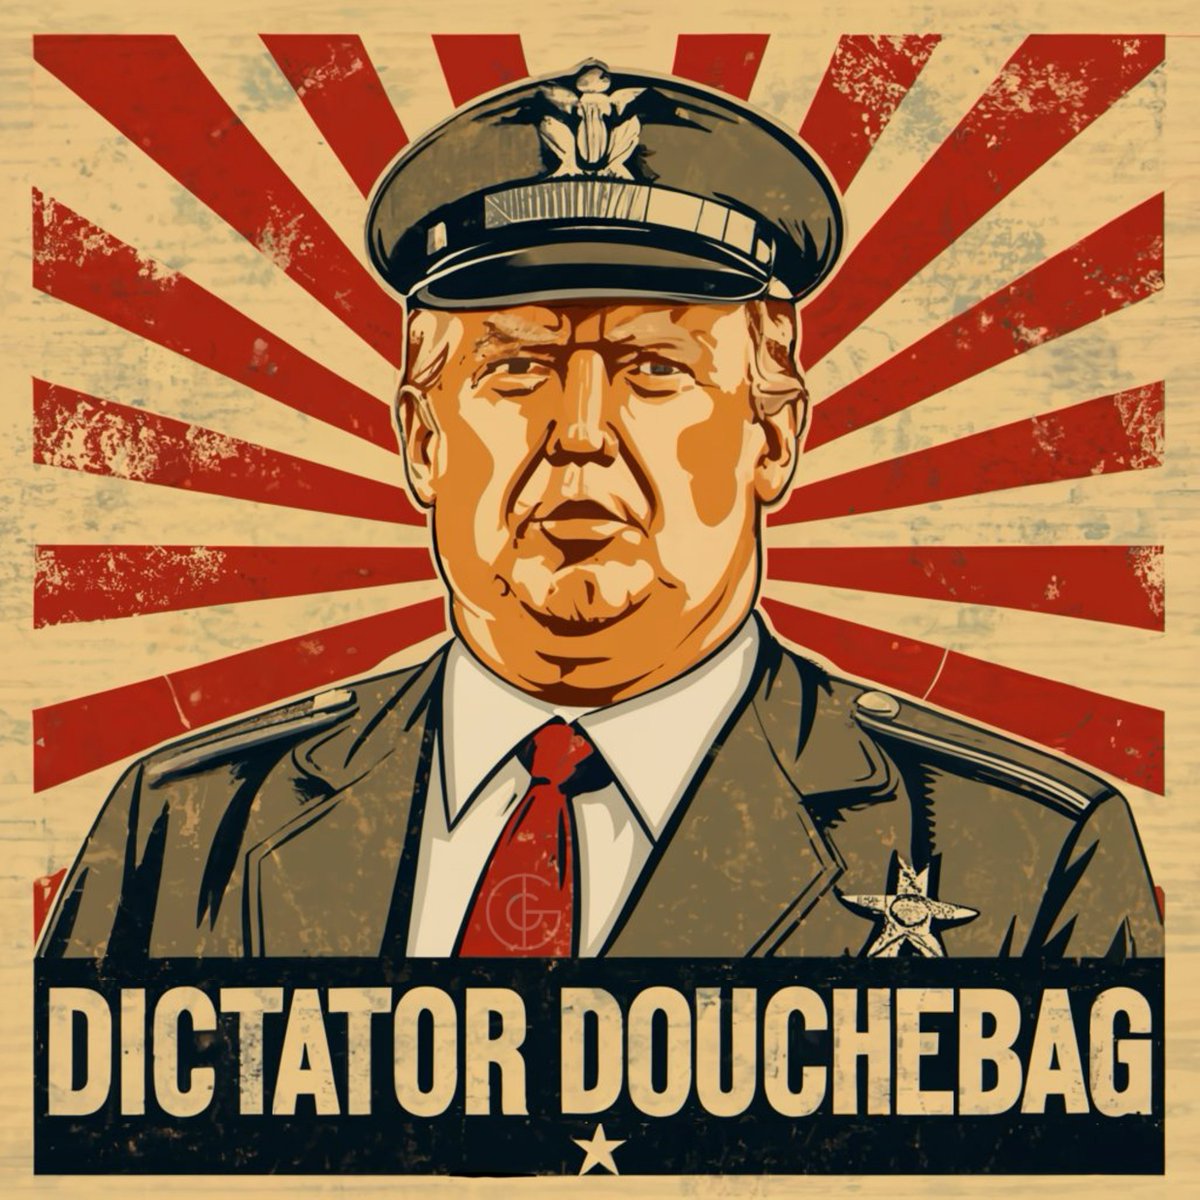 At today's trial, Blanche asked Cohen if he called Trump 'Dictator Douchebag.' Cohen answered, 'Sounds like something I would say.' 🤣 #TrumpTrial #DictatorDouchebag